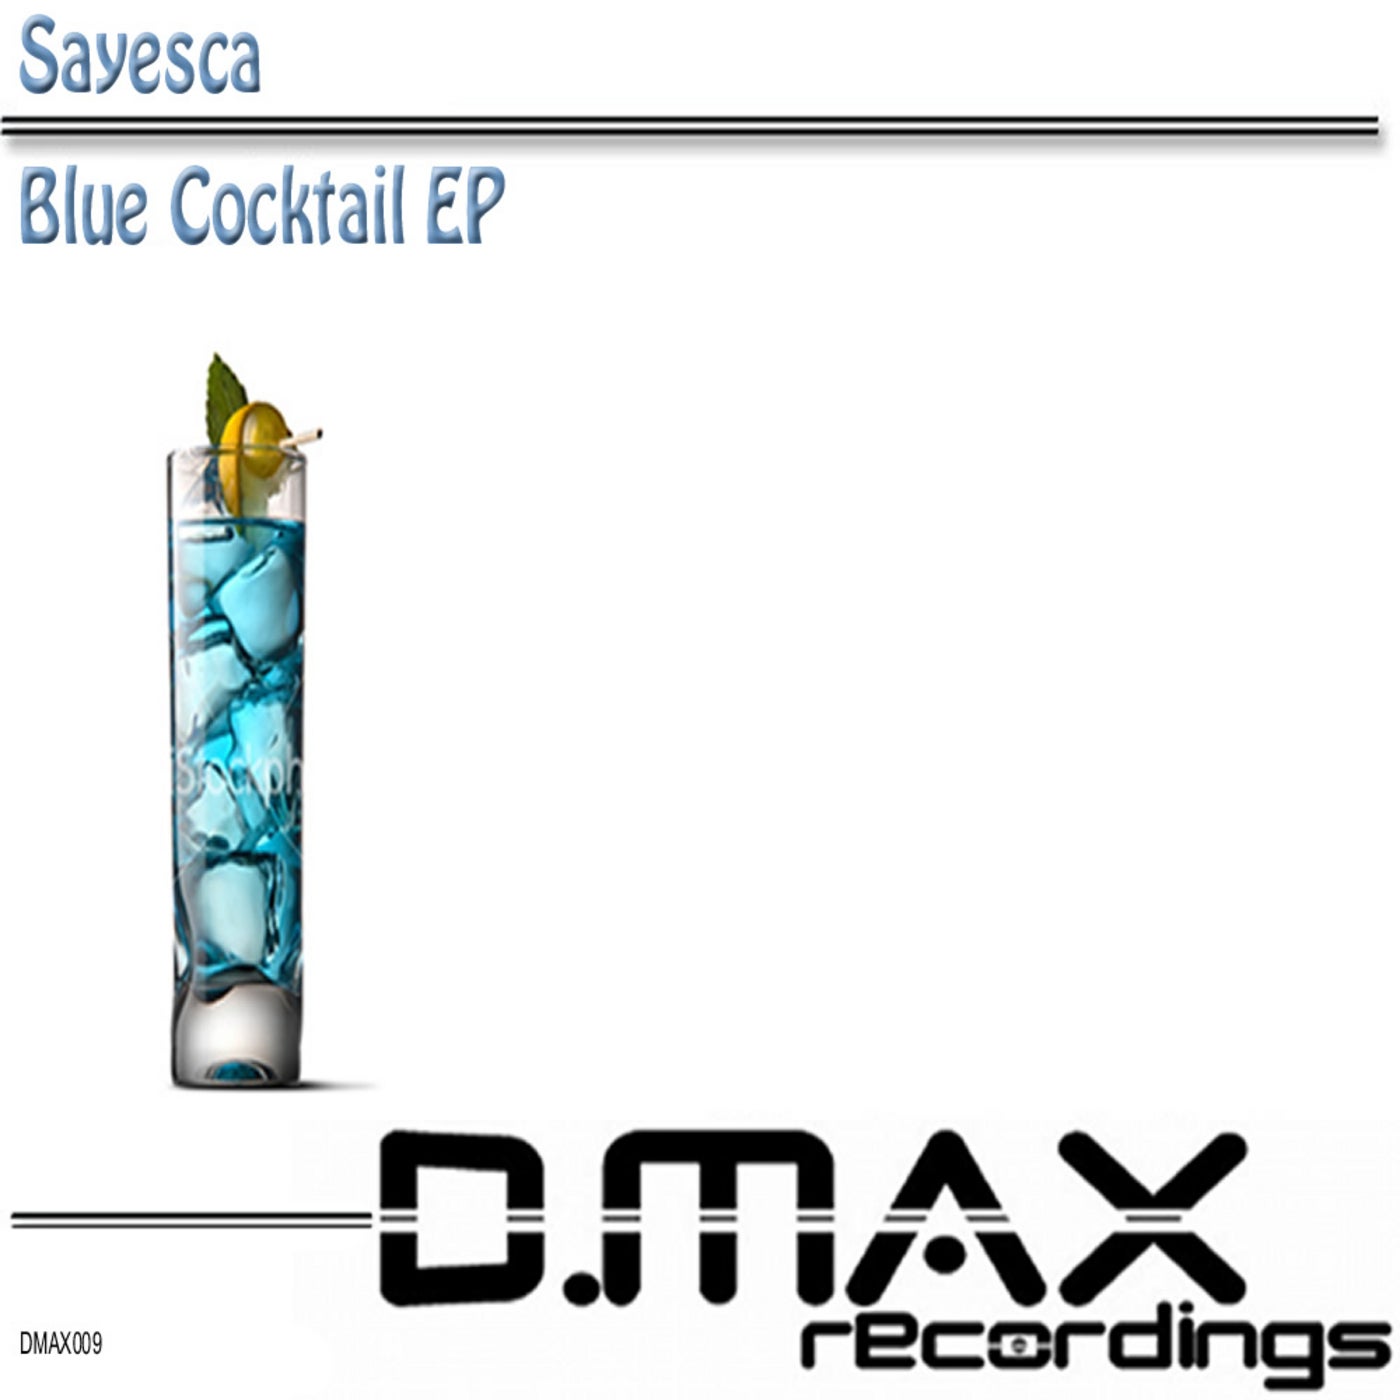 Blue Cocktail EP